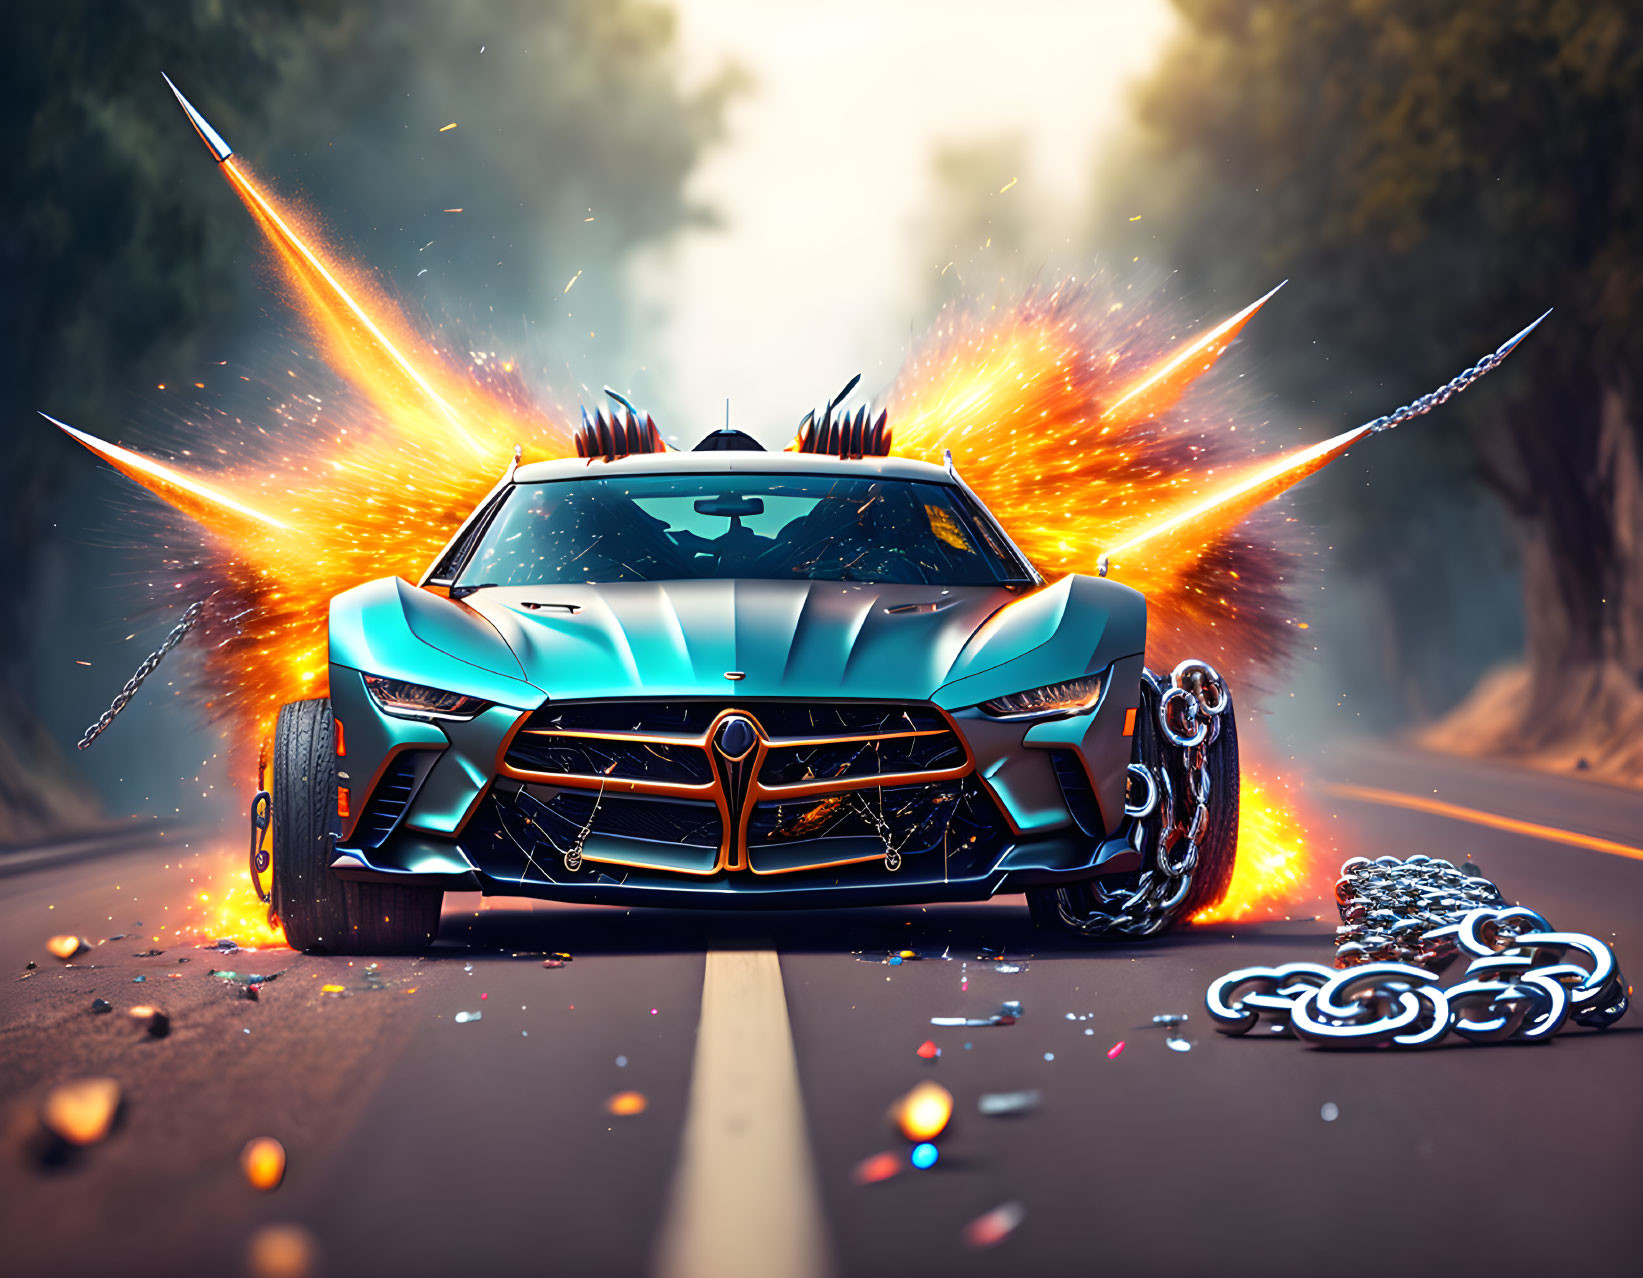 Customized sports car with chains and spikes emitting sparks and flames